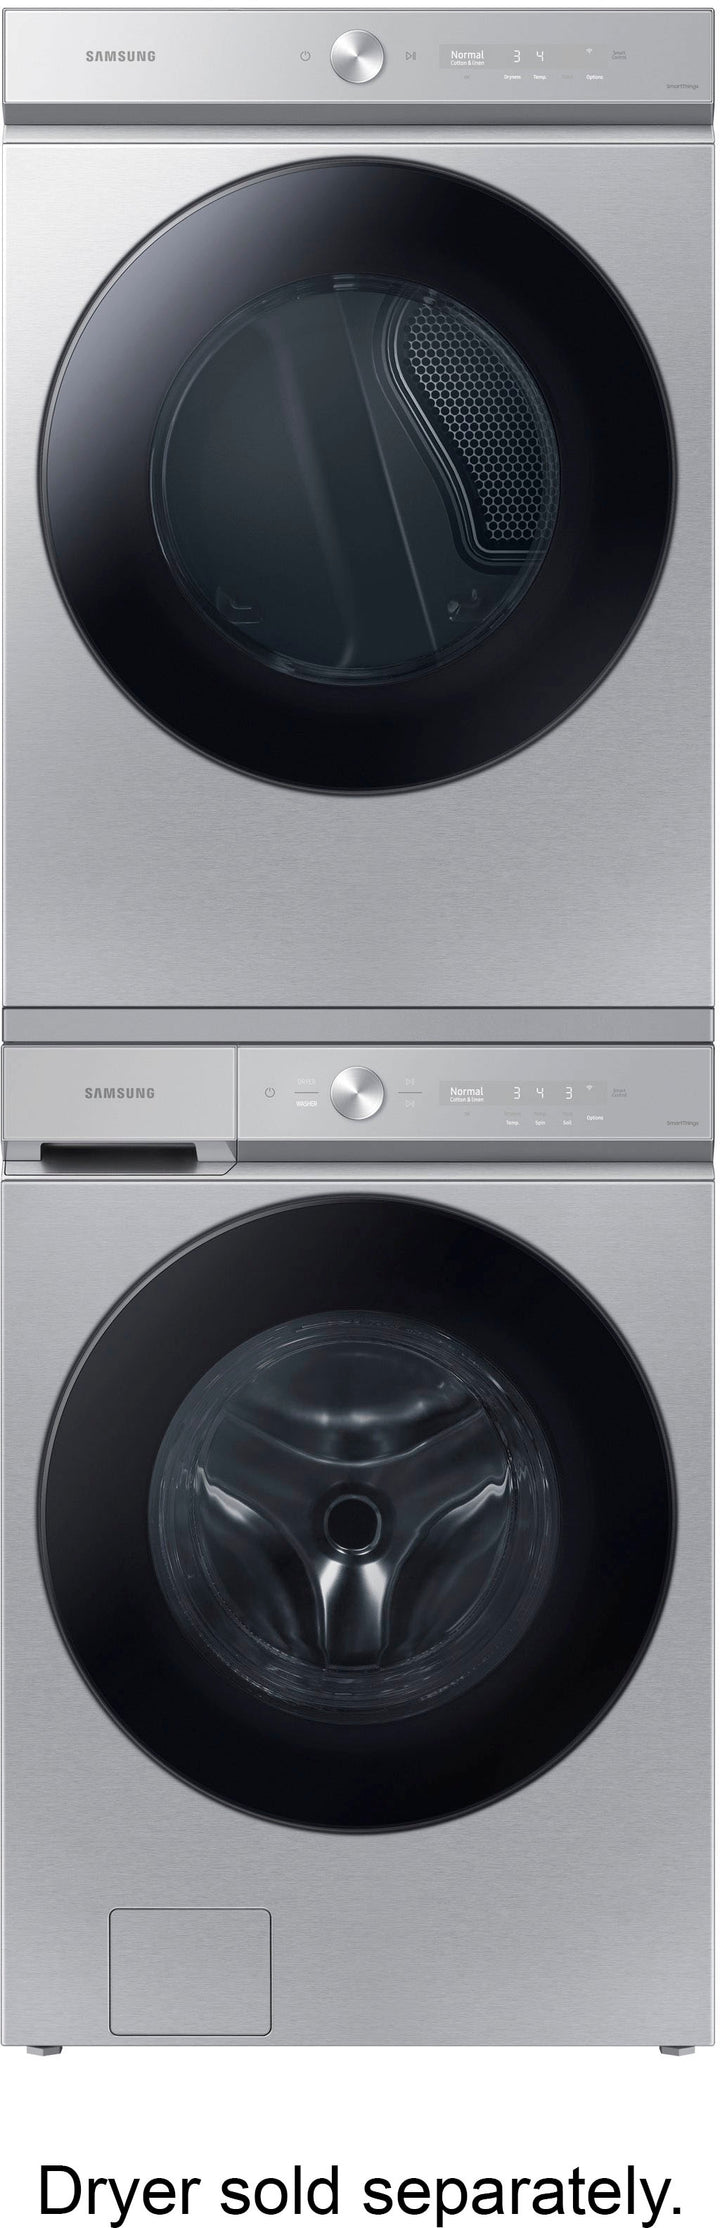 Samsung - Bespoke 5.3 cu. ft. Ultra Capacity Front Load Washer with Super Speed Wash and AI Smart Dial - Silver steel_11